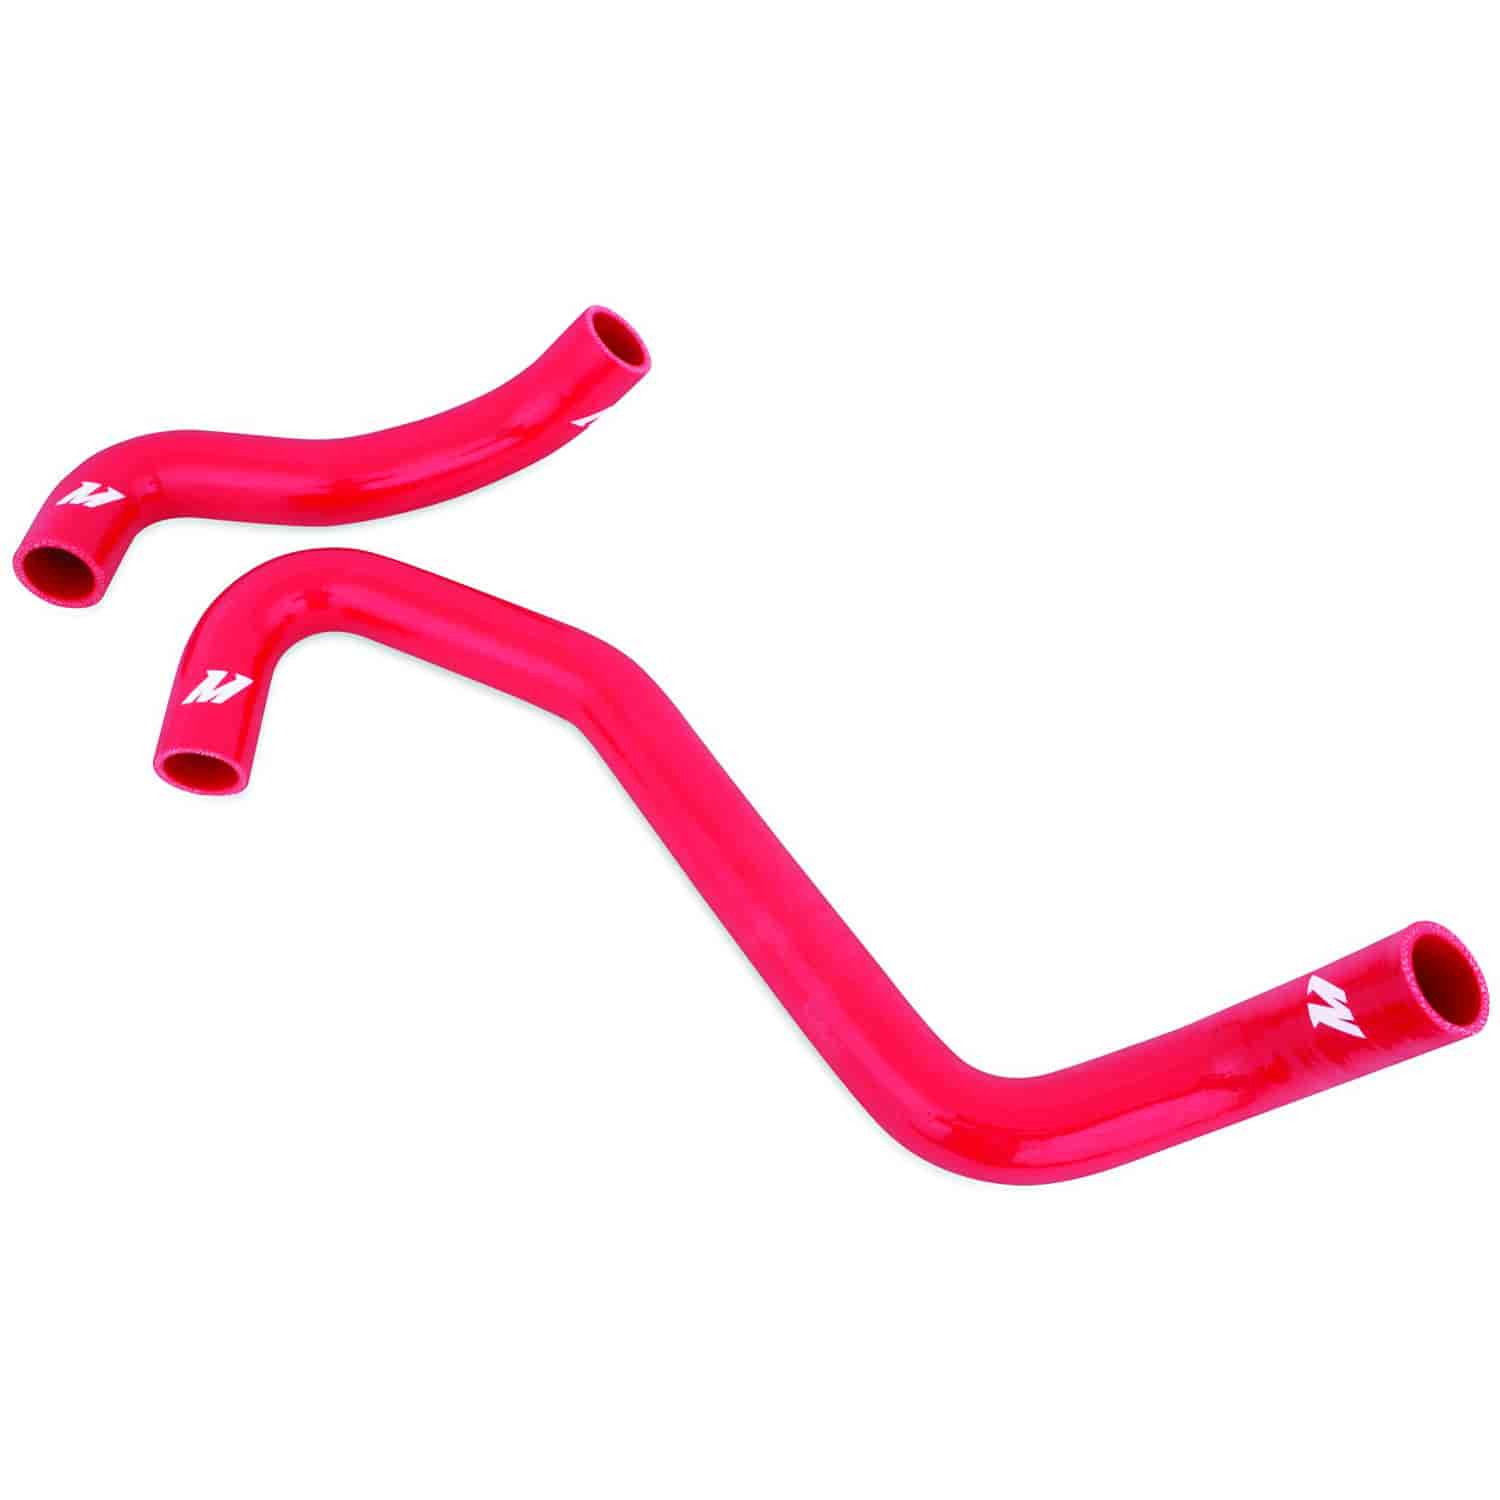 Silicone Radiator Hose Kit for Ford 7.3L Powerstroke Engines [Red]